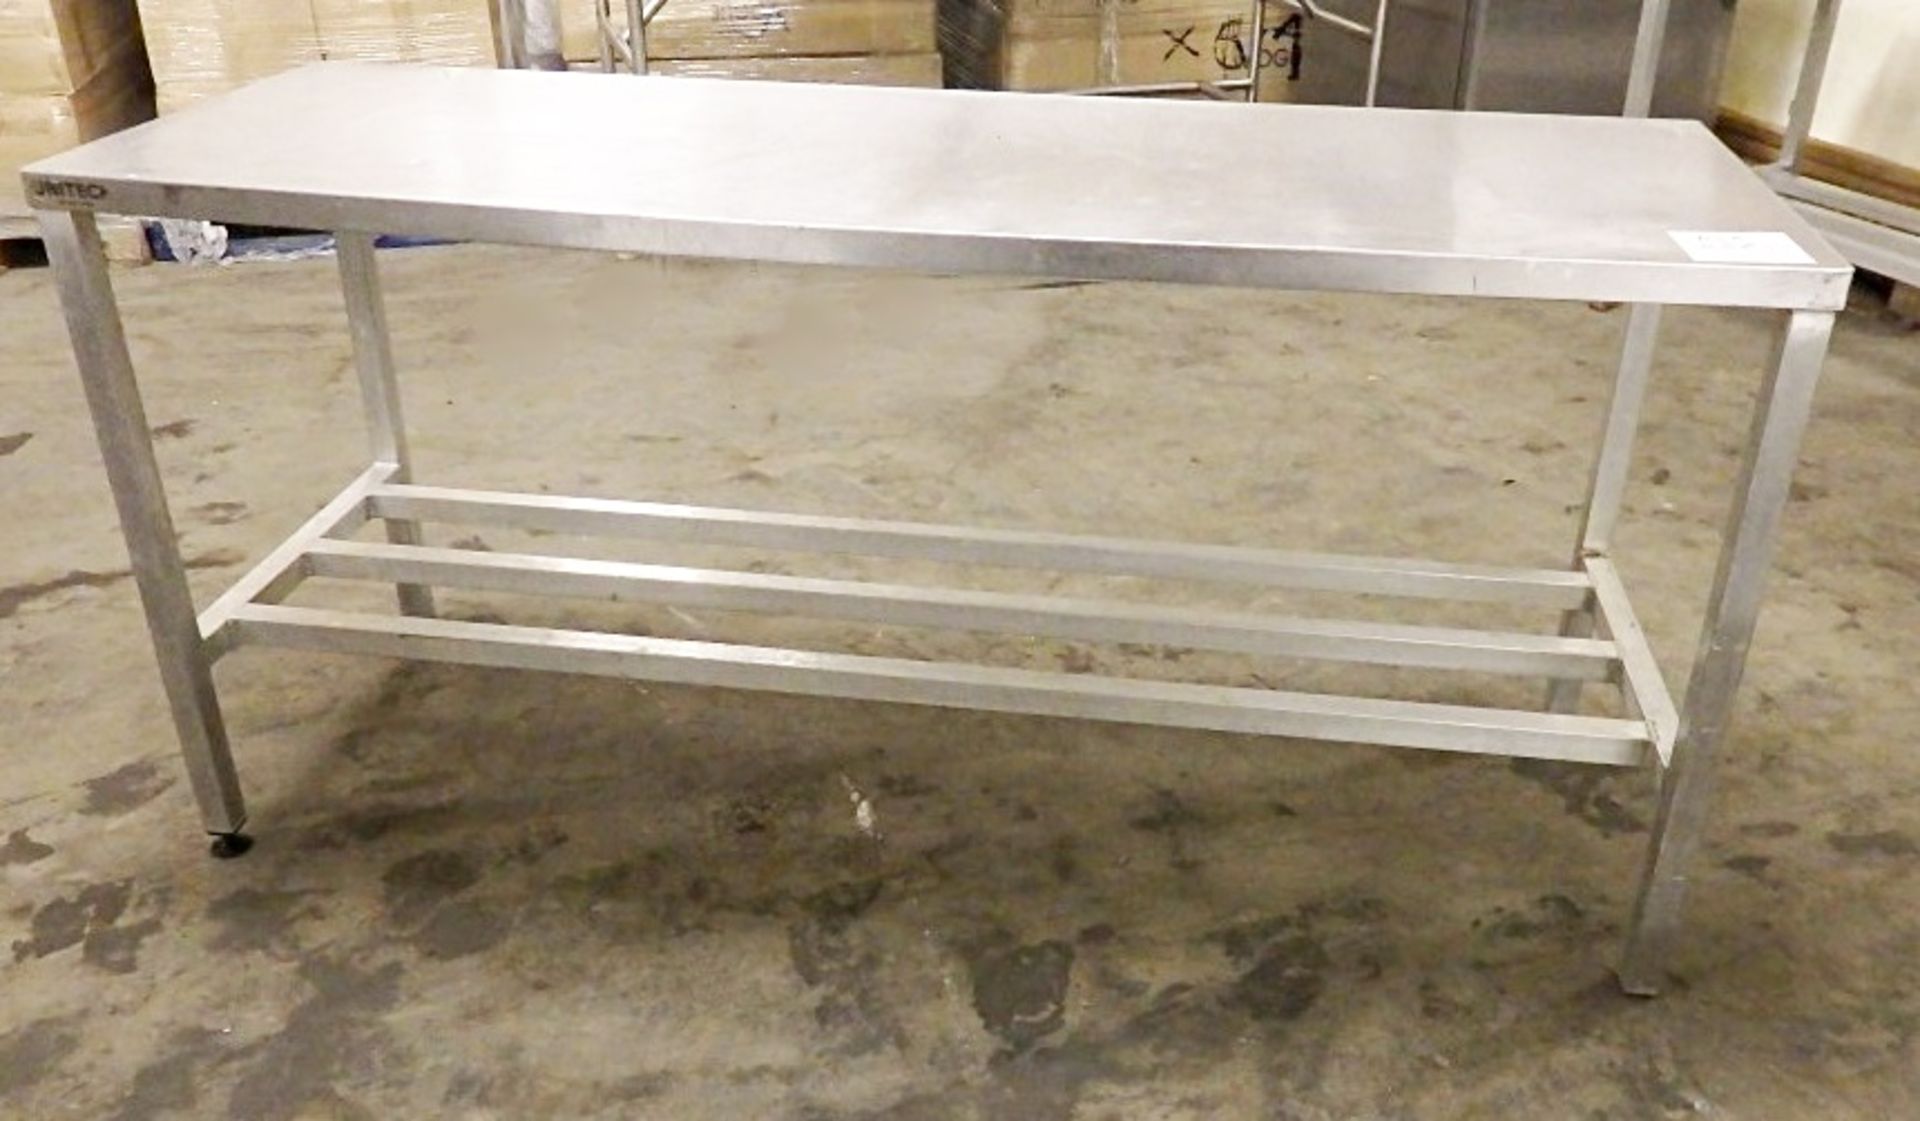 1 x Long Stainless Steel Catering Preparation Table Frame - Dimensions: W176 x D62 x H84cm - Solid